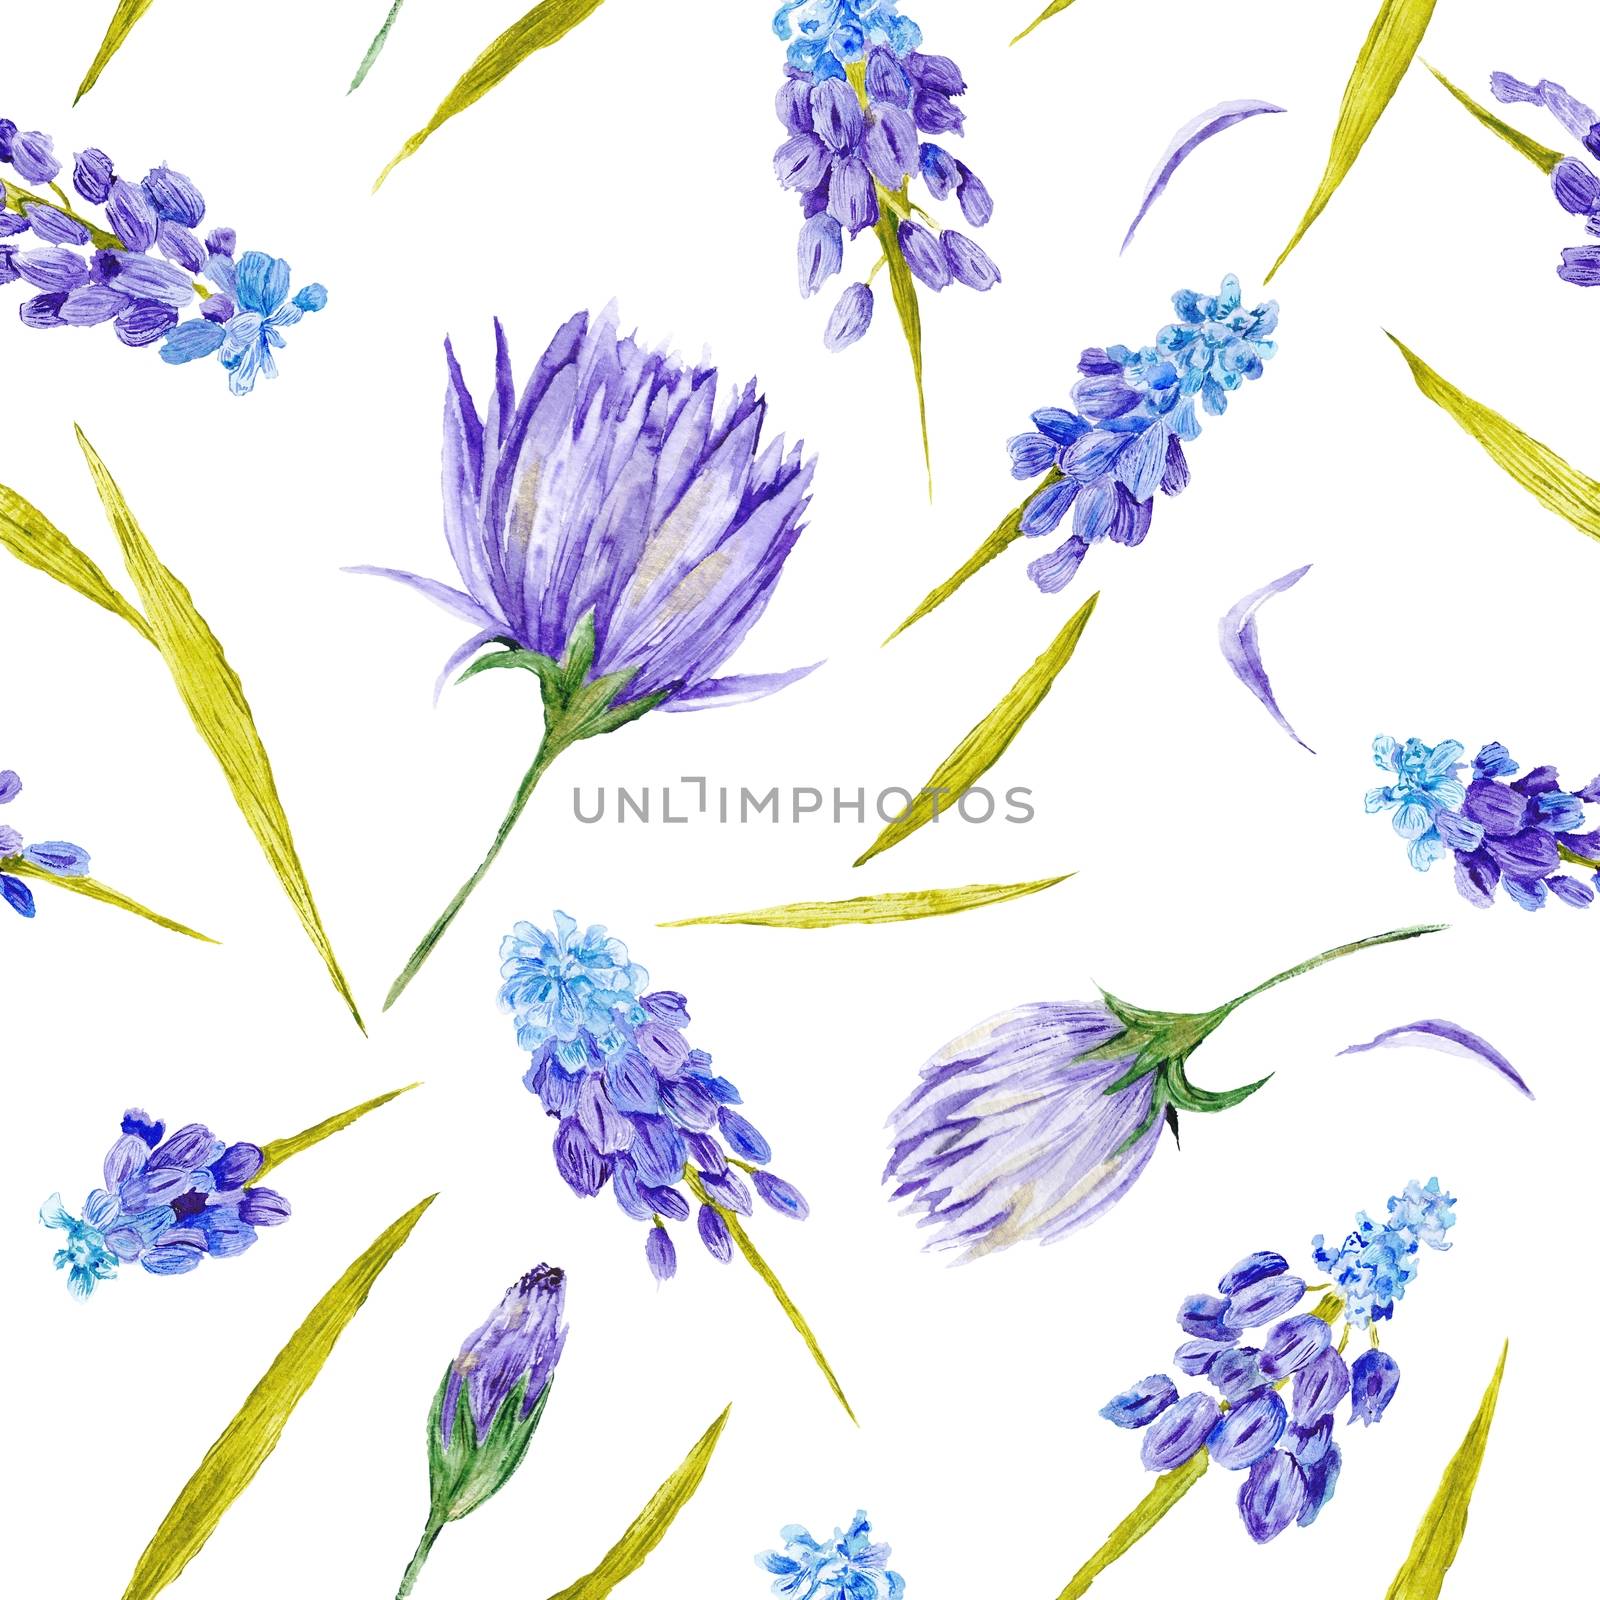 Seamless hand-painted watercolor illustration with purple flowers and green leaves on white background